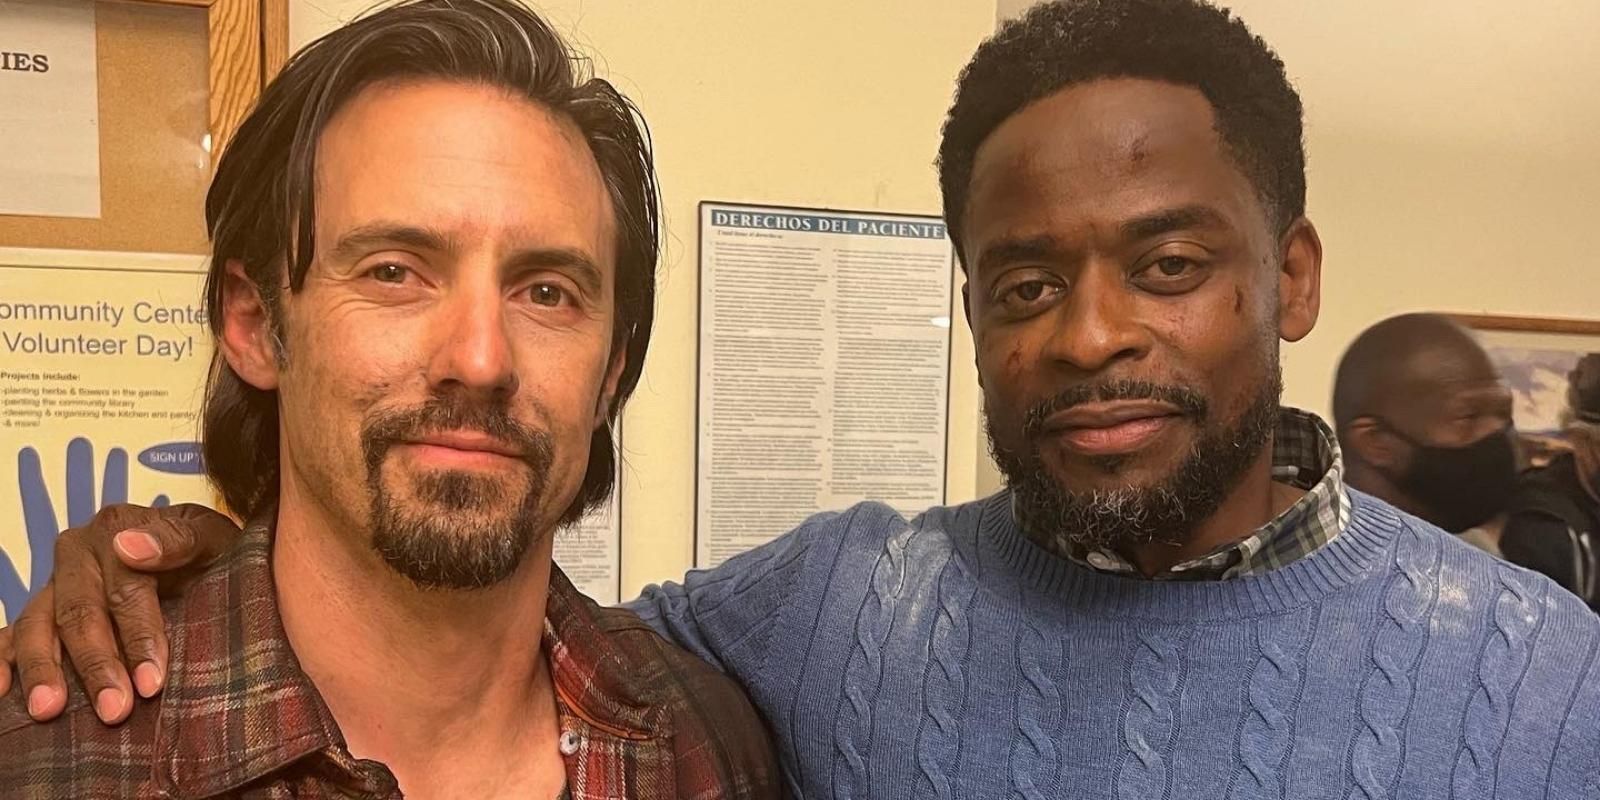 Milo Ventimiglia and Dule Hill behind the scenes of This Is Us